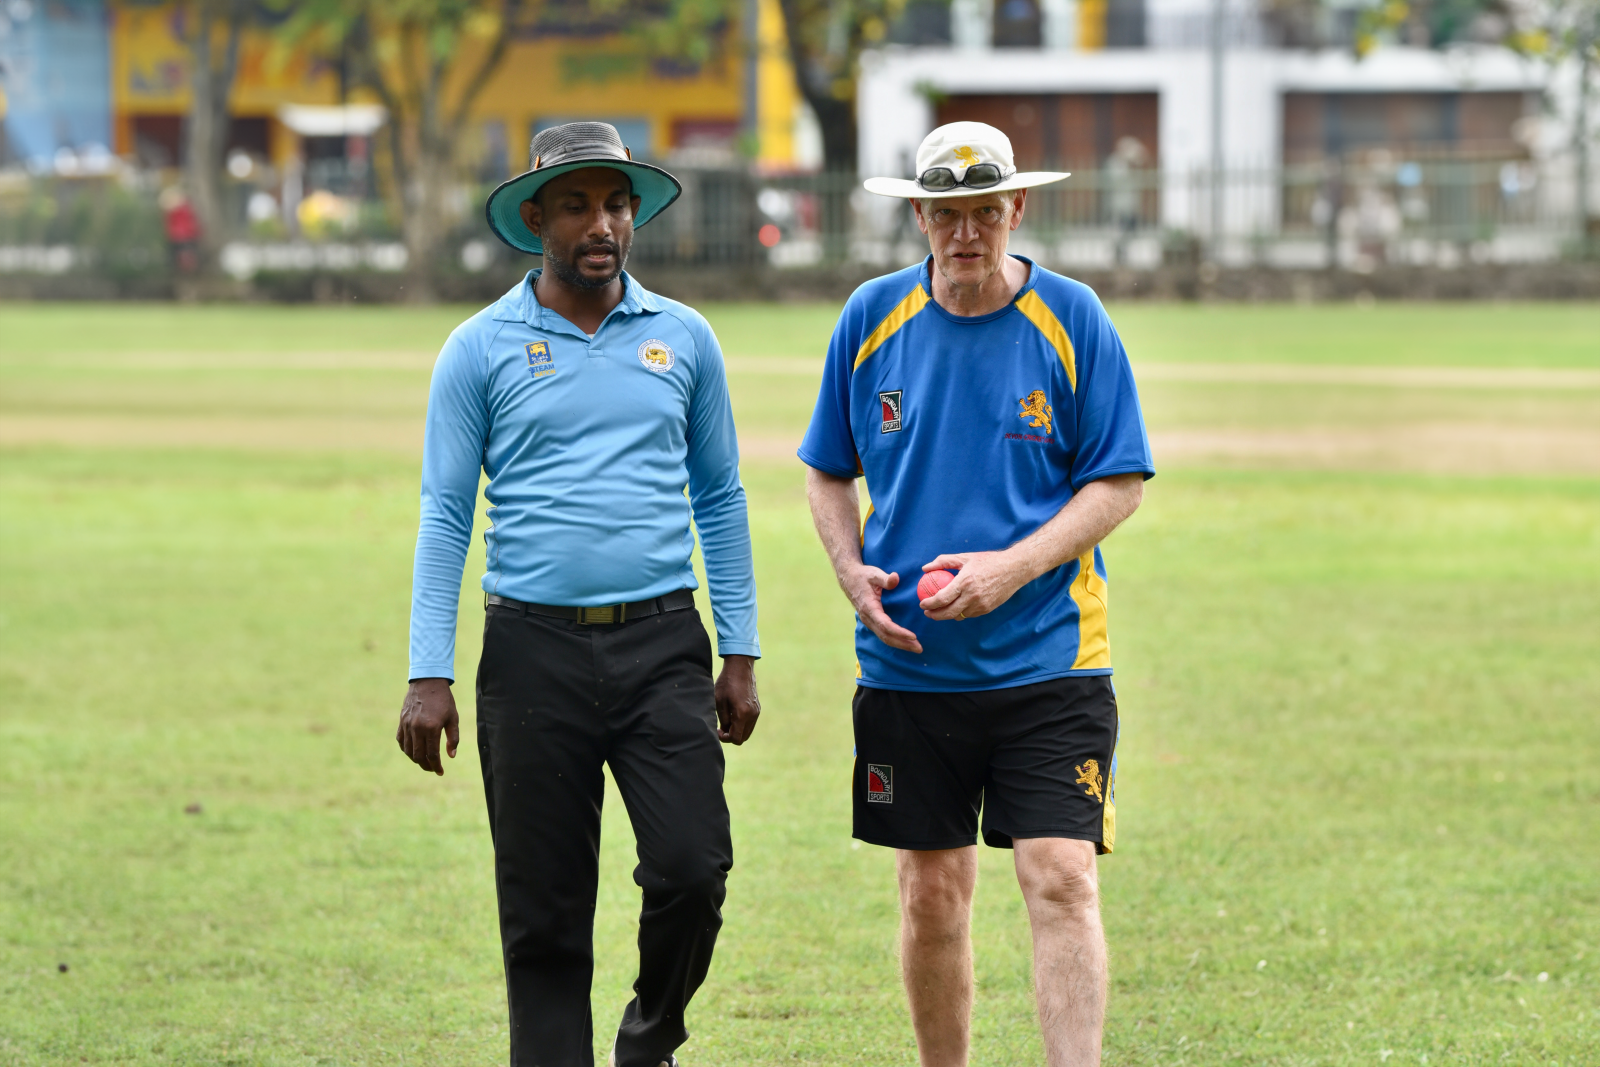 David Joseph (right) speaks to an umpire in the game against Mercantile Cricket Association Girls.